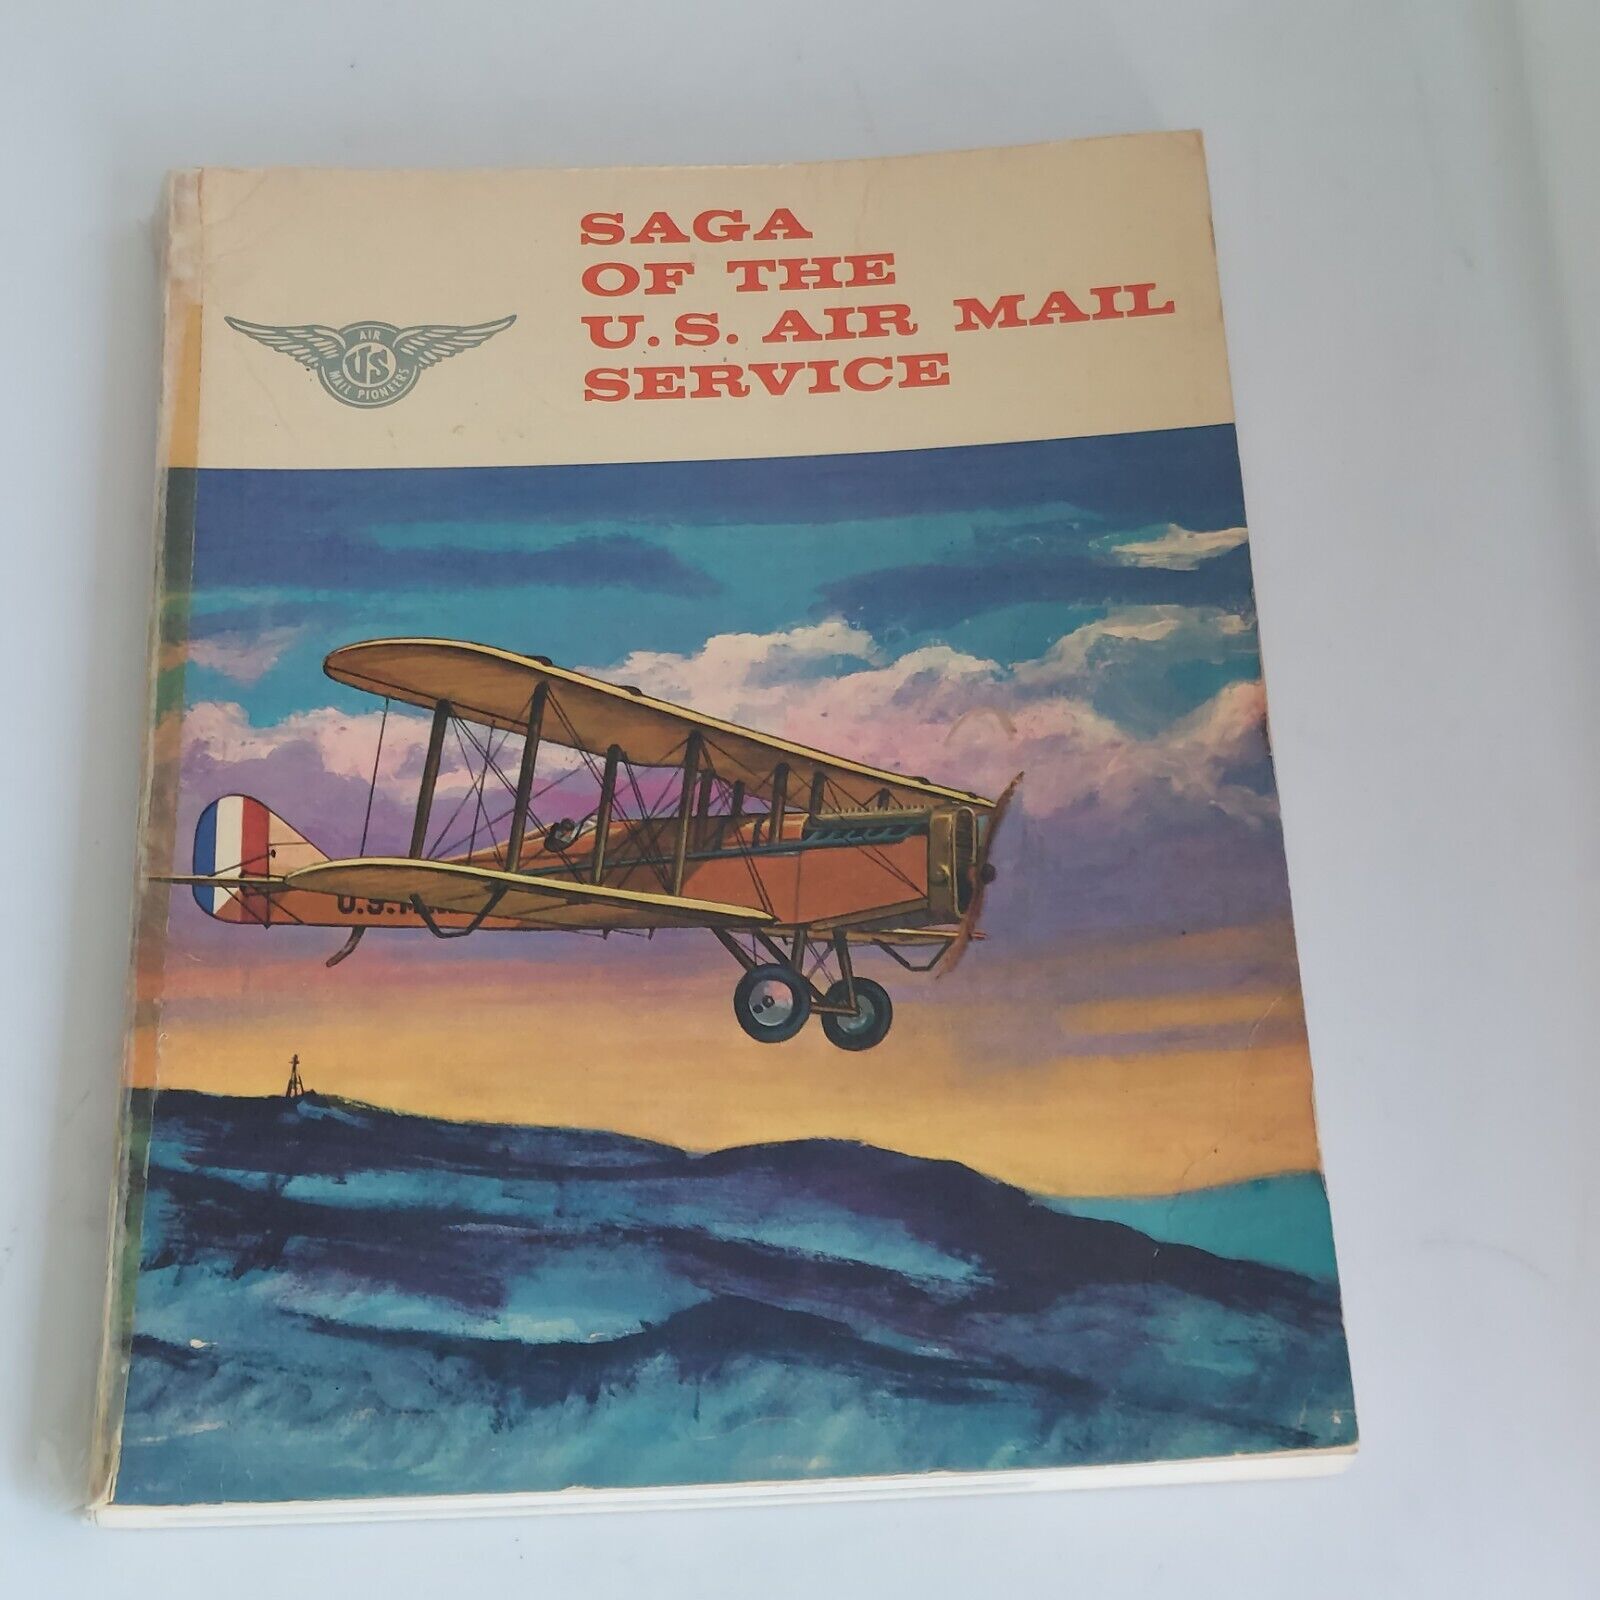 Saga of the US Air Mail Service book  1962 first edition (Letter written inside)